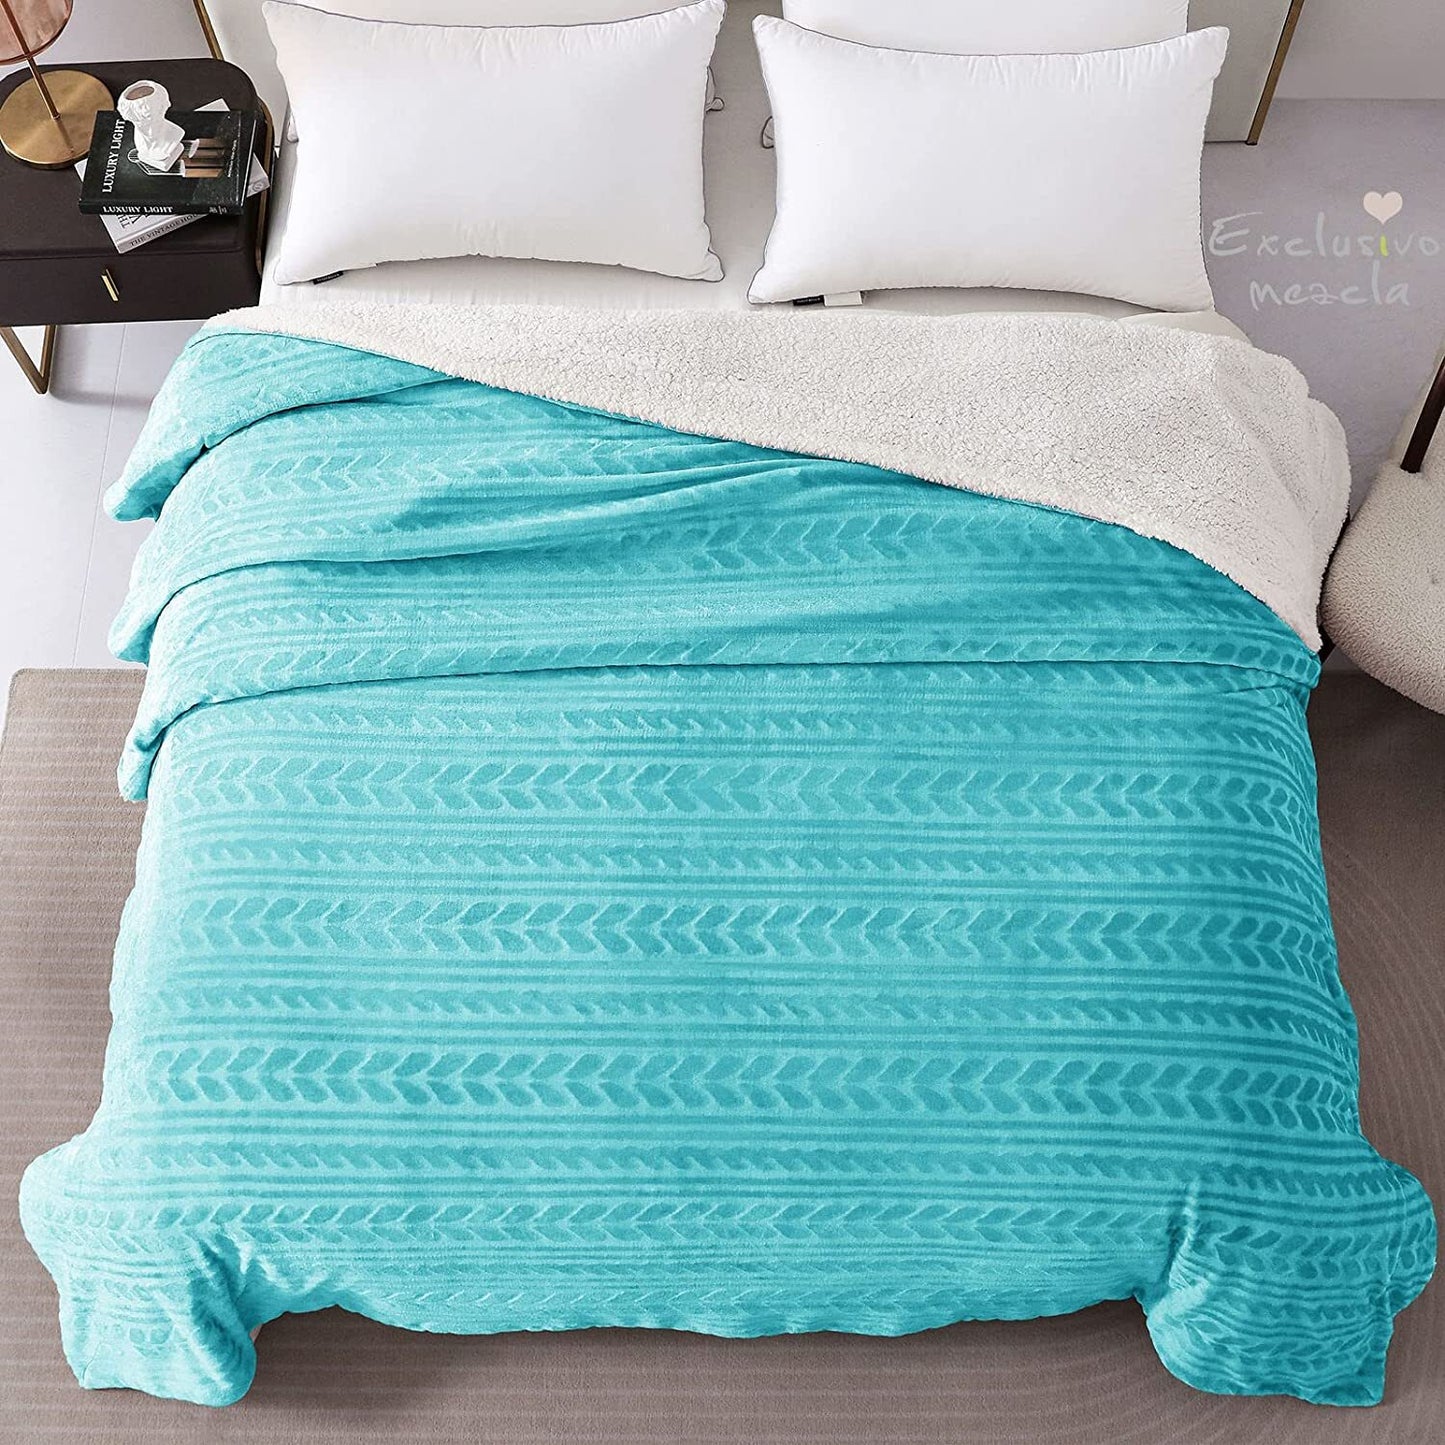 Exclusivo Mezcla Twin Size Sherpa Fleece Bed Blanket, Ultra Soft and Warm Reversible Velvet Blankets for Bed Couch Sofa 90x66 inches, Aqua Blue